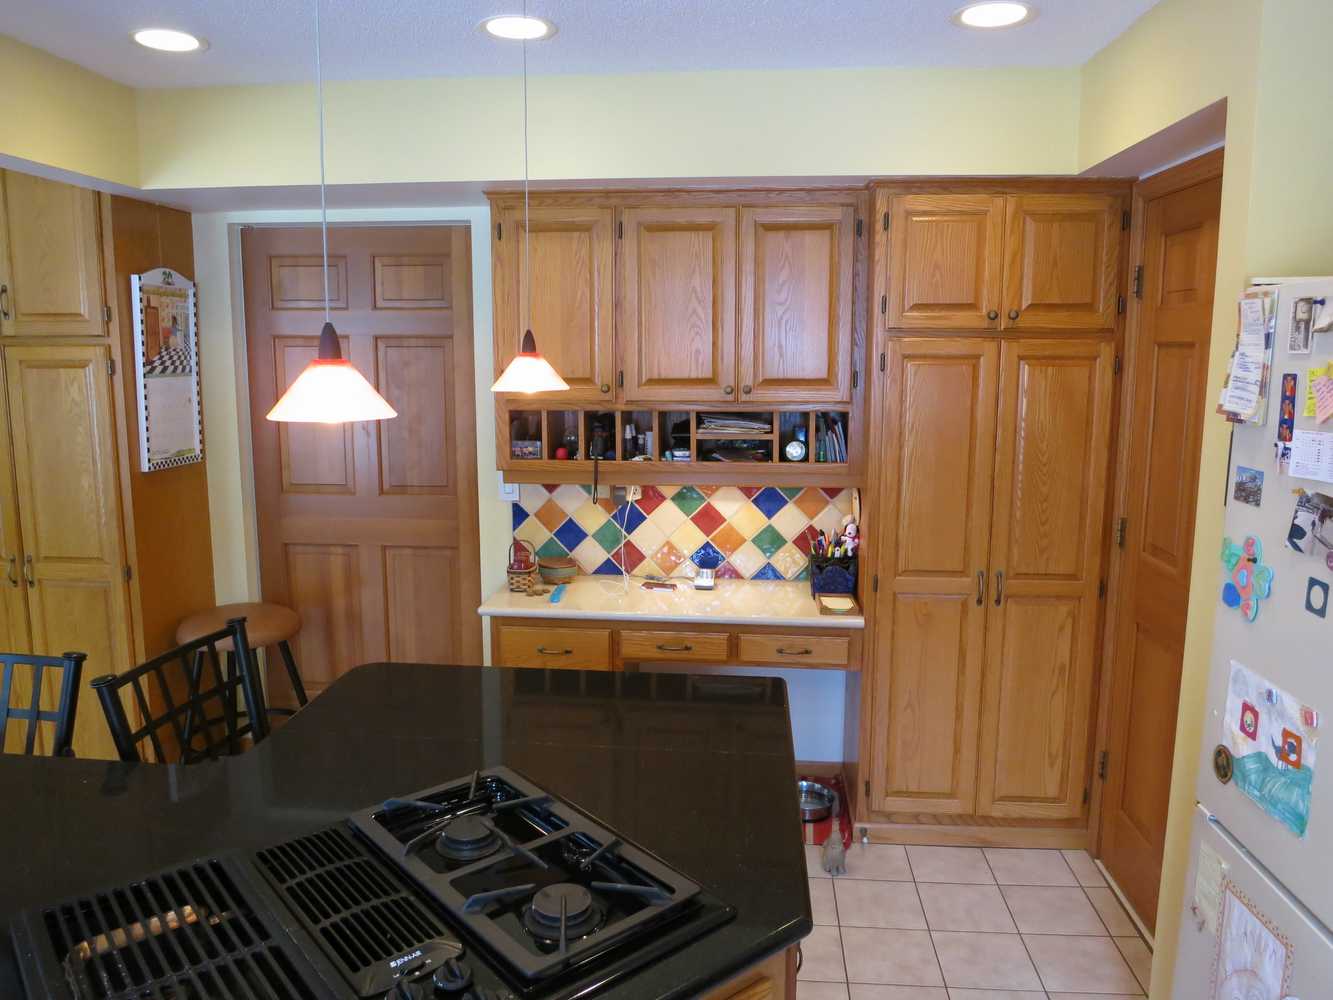 Kitchen Remodeling | Plymouth | Wuensch Construction